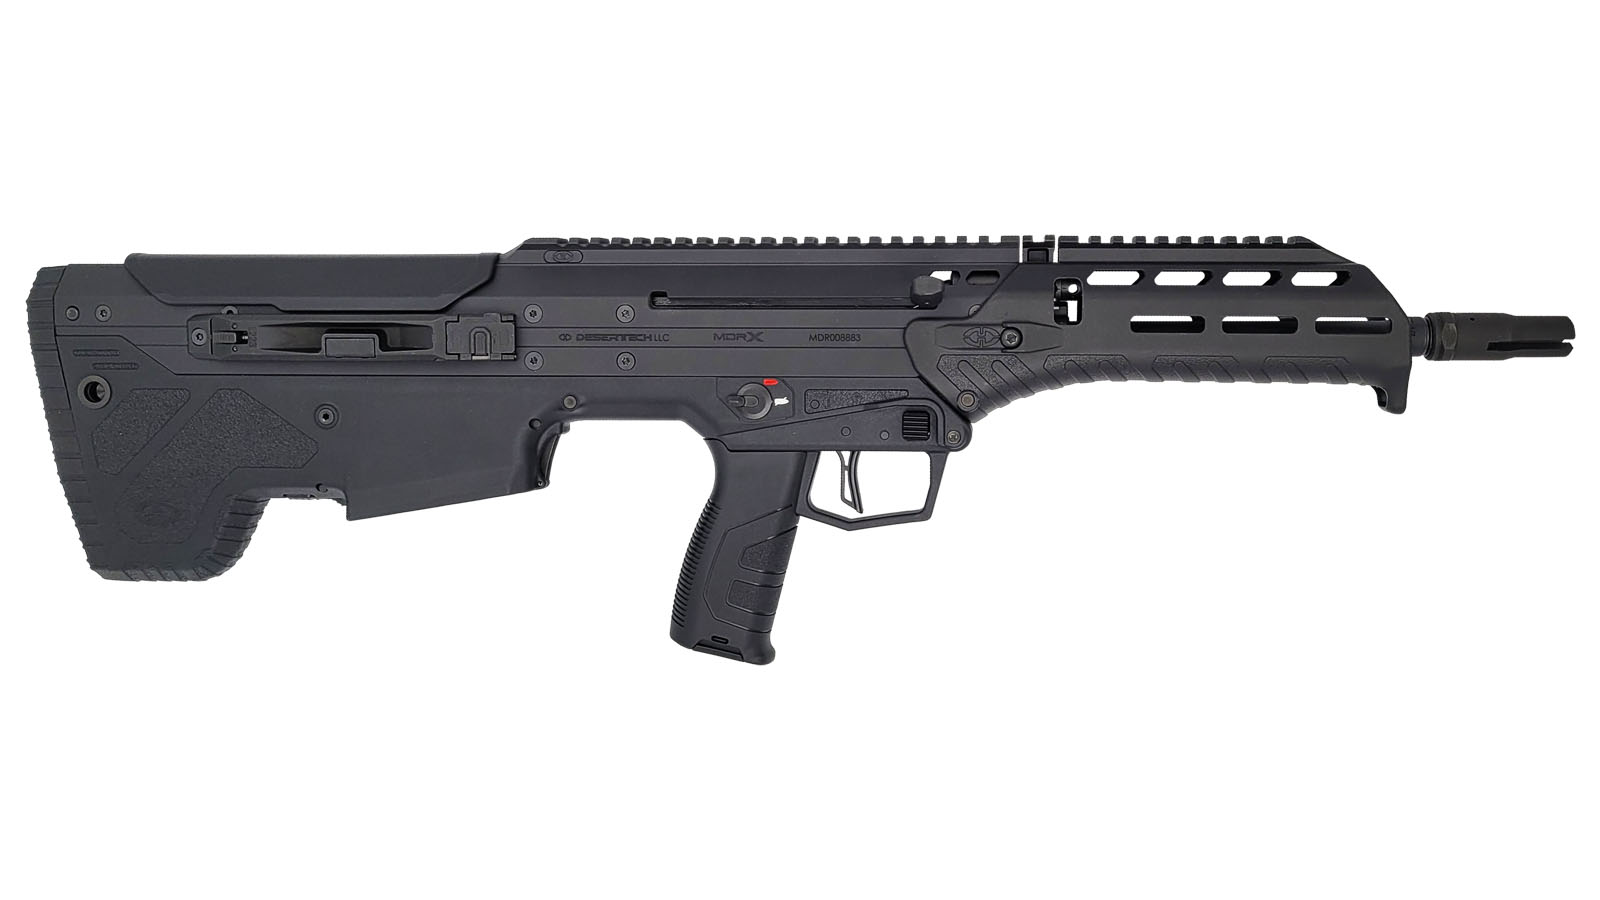 MDRx Rifle, 556NATO 223Rem 16" 10rd Forward-Ejection BLK